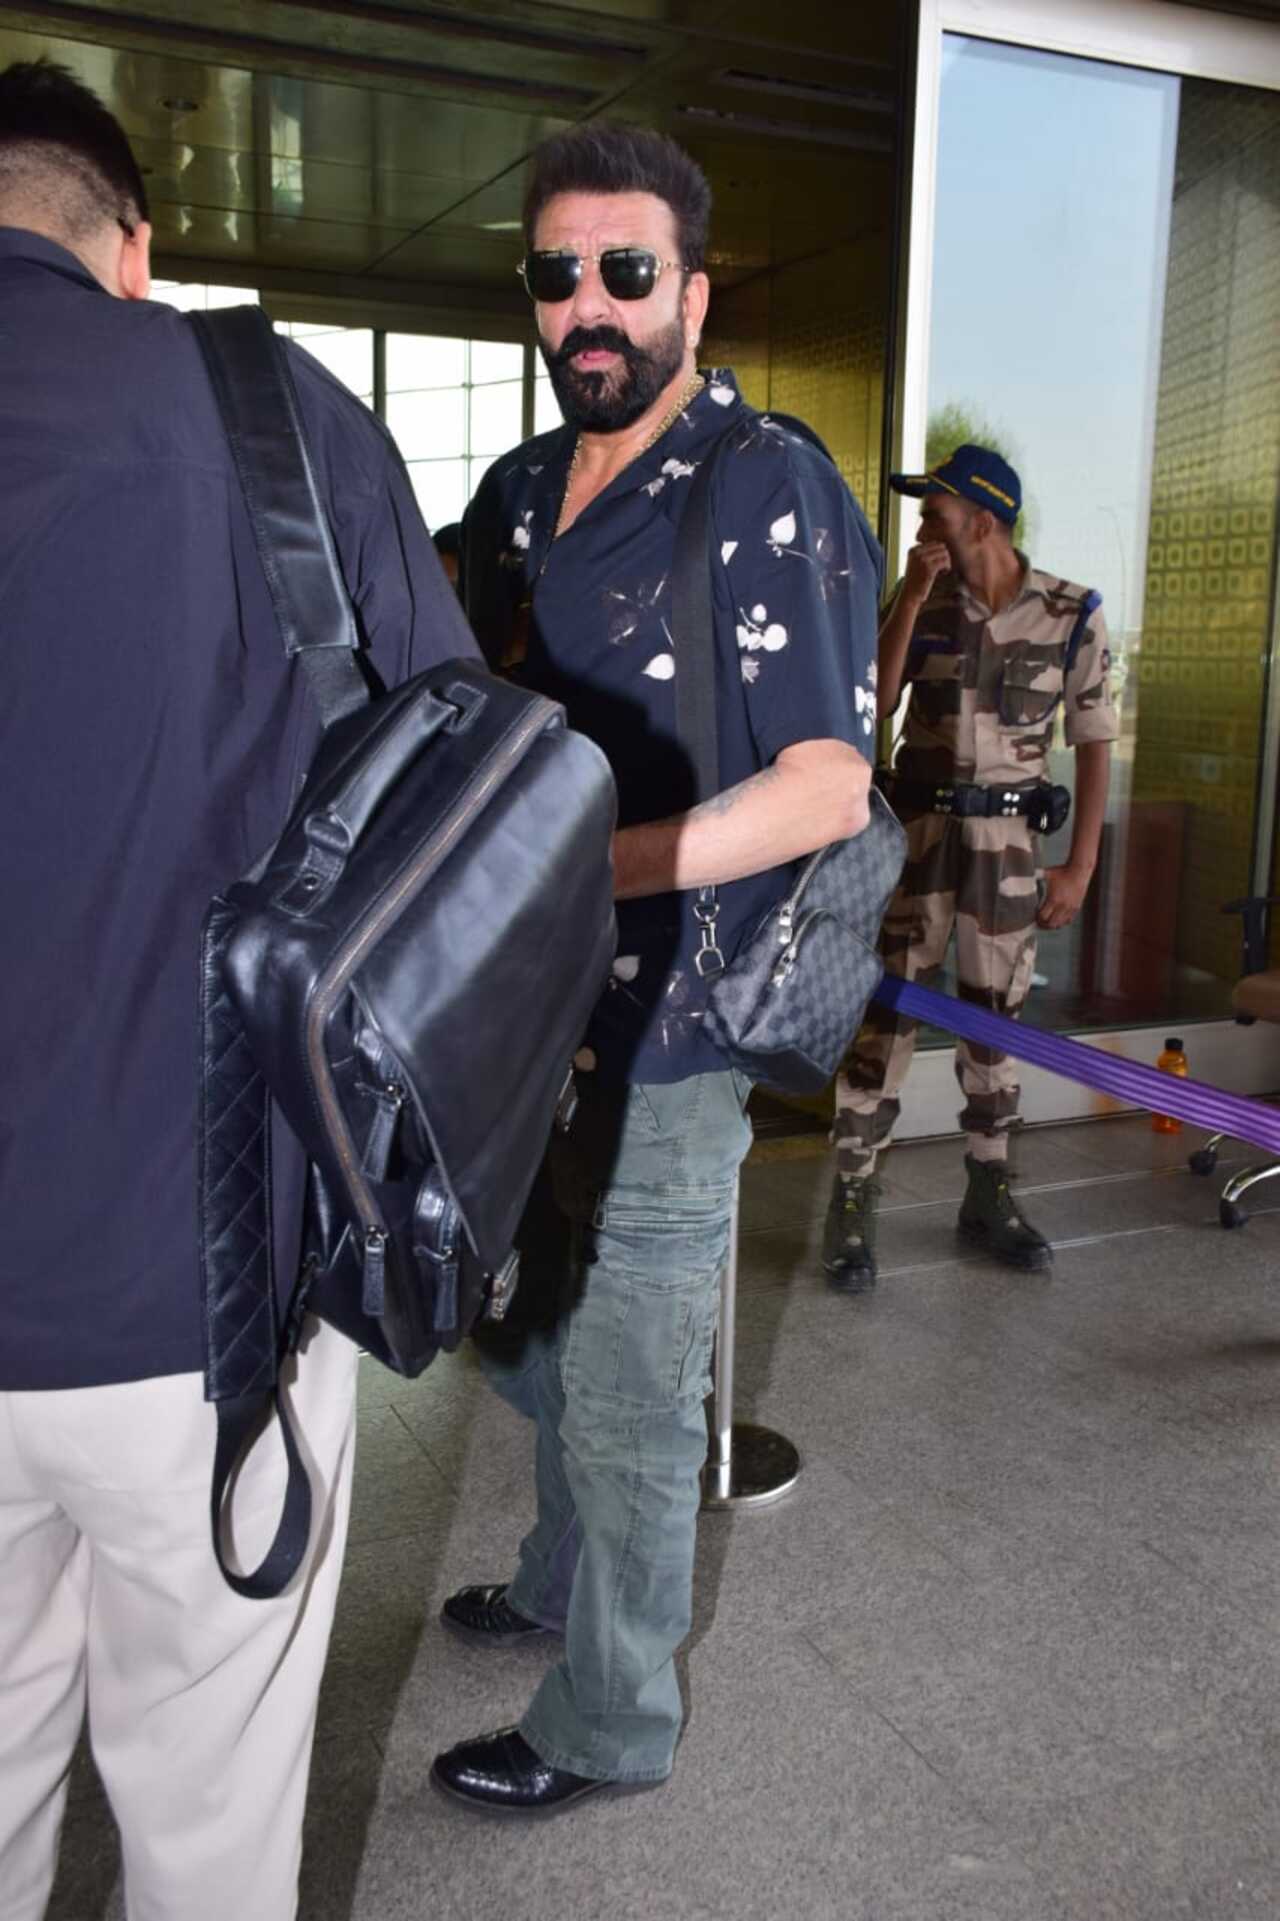 Sanjay Dutt struck a pose for the paparazzi before he walked into the airport